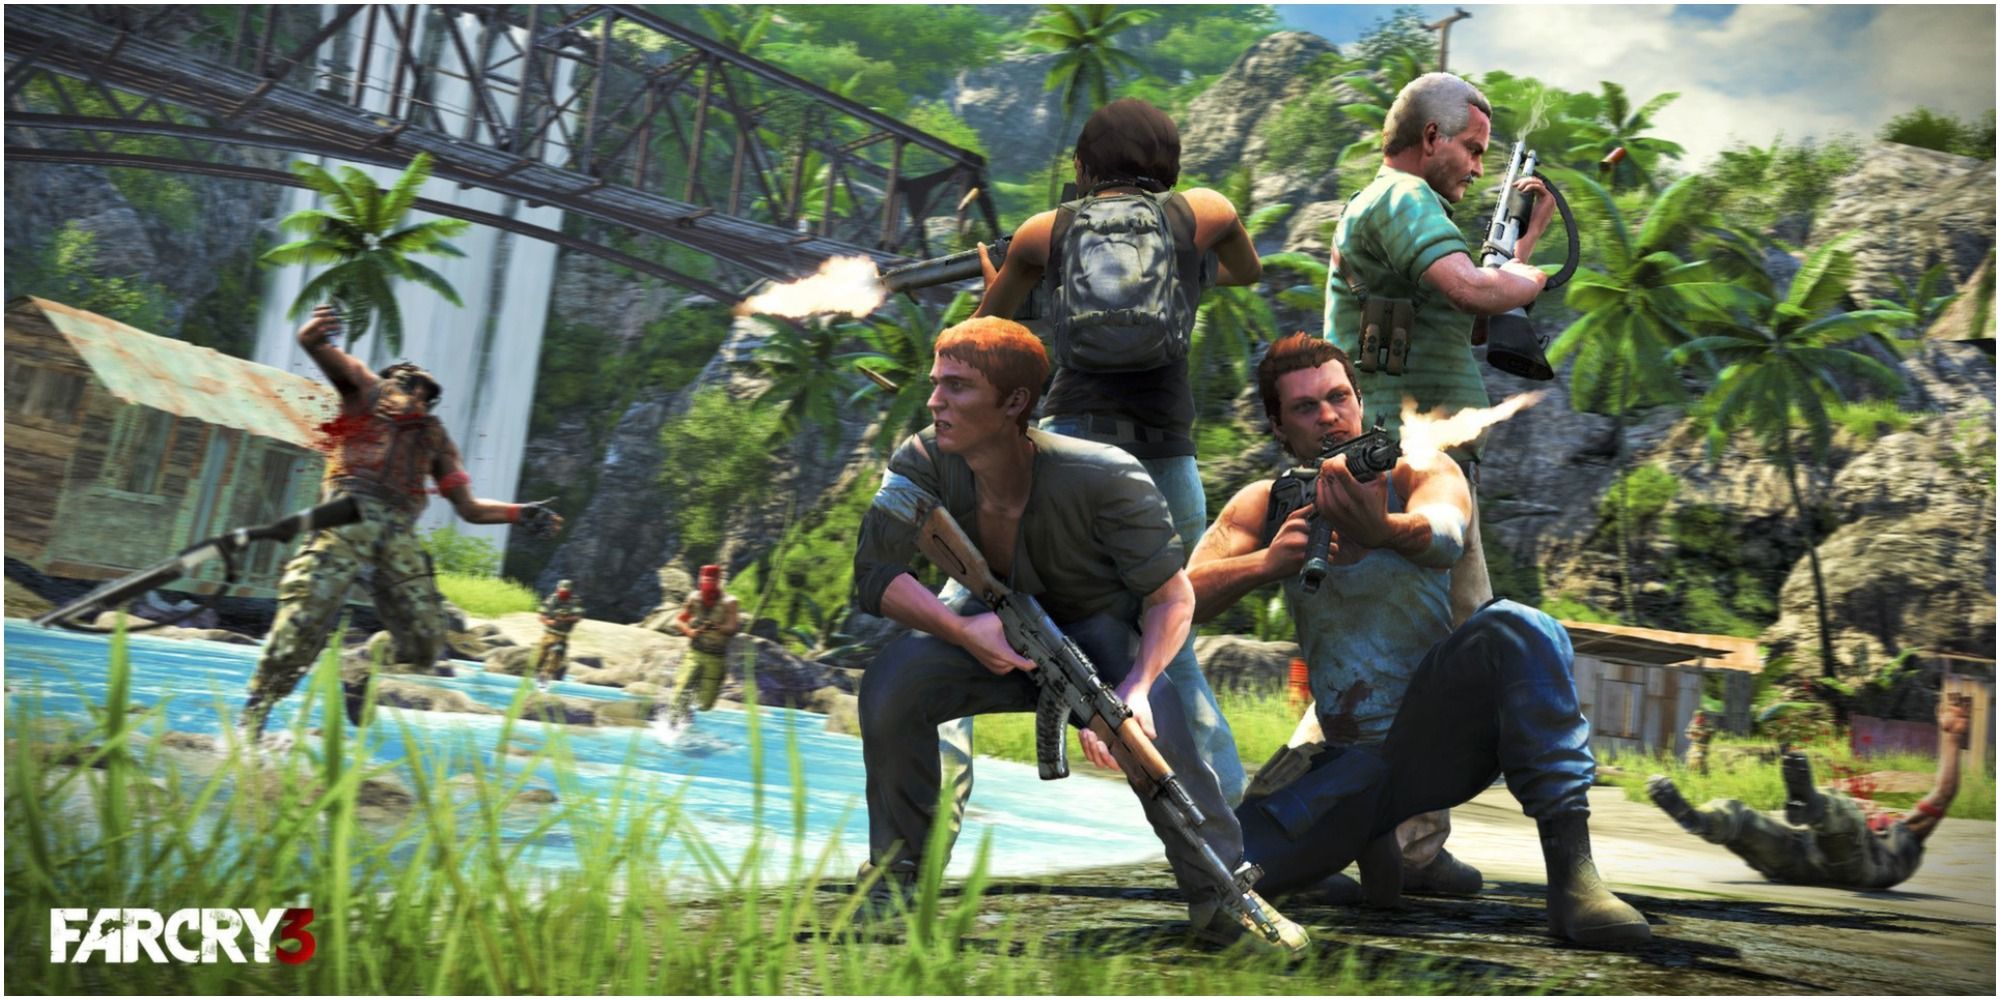 A promo image for Far Cry 3 of several characters in a gunfight near a waterfall and bridge.